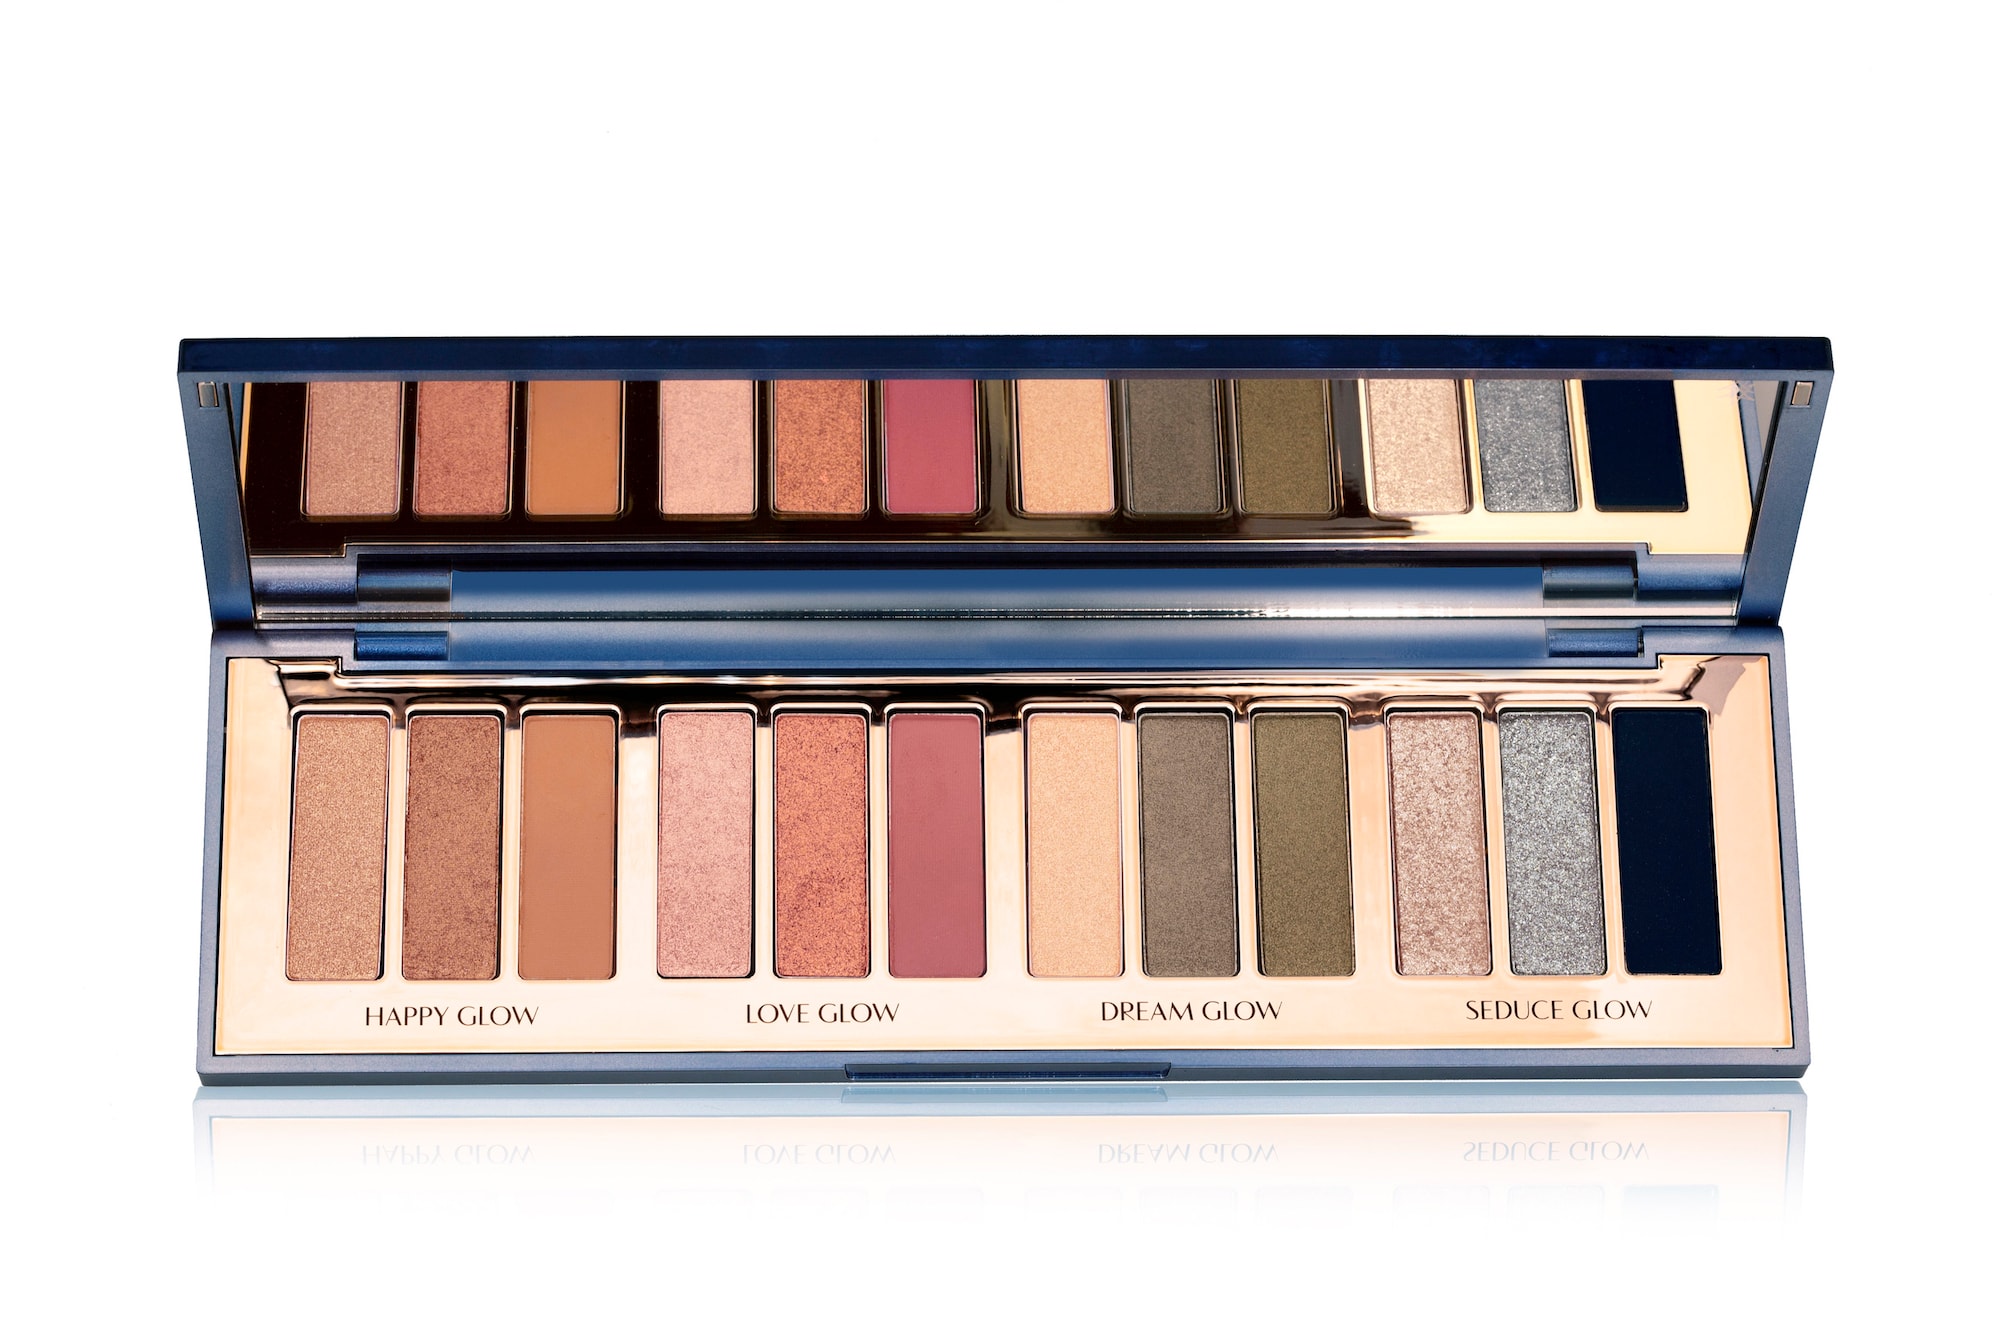 Charlotte Tilbury Instant Eye Palette Release Eyeshadow Beauty Makeup Exclusive Launch Teaser Starry Eyes to Hypnotise